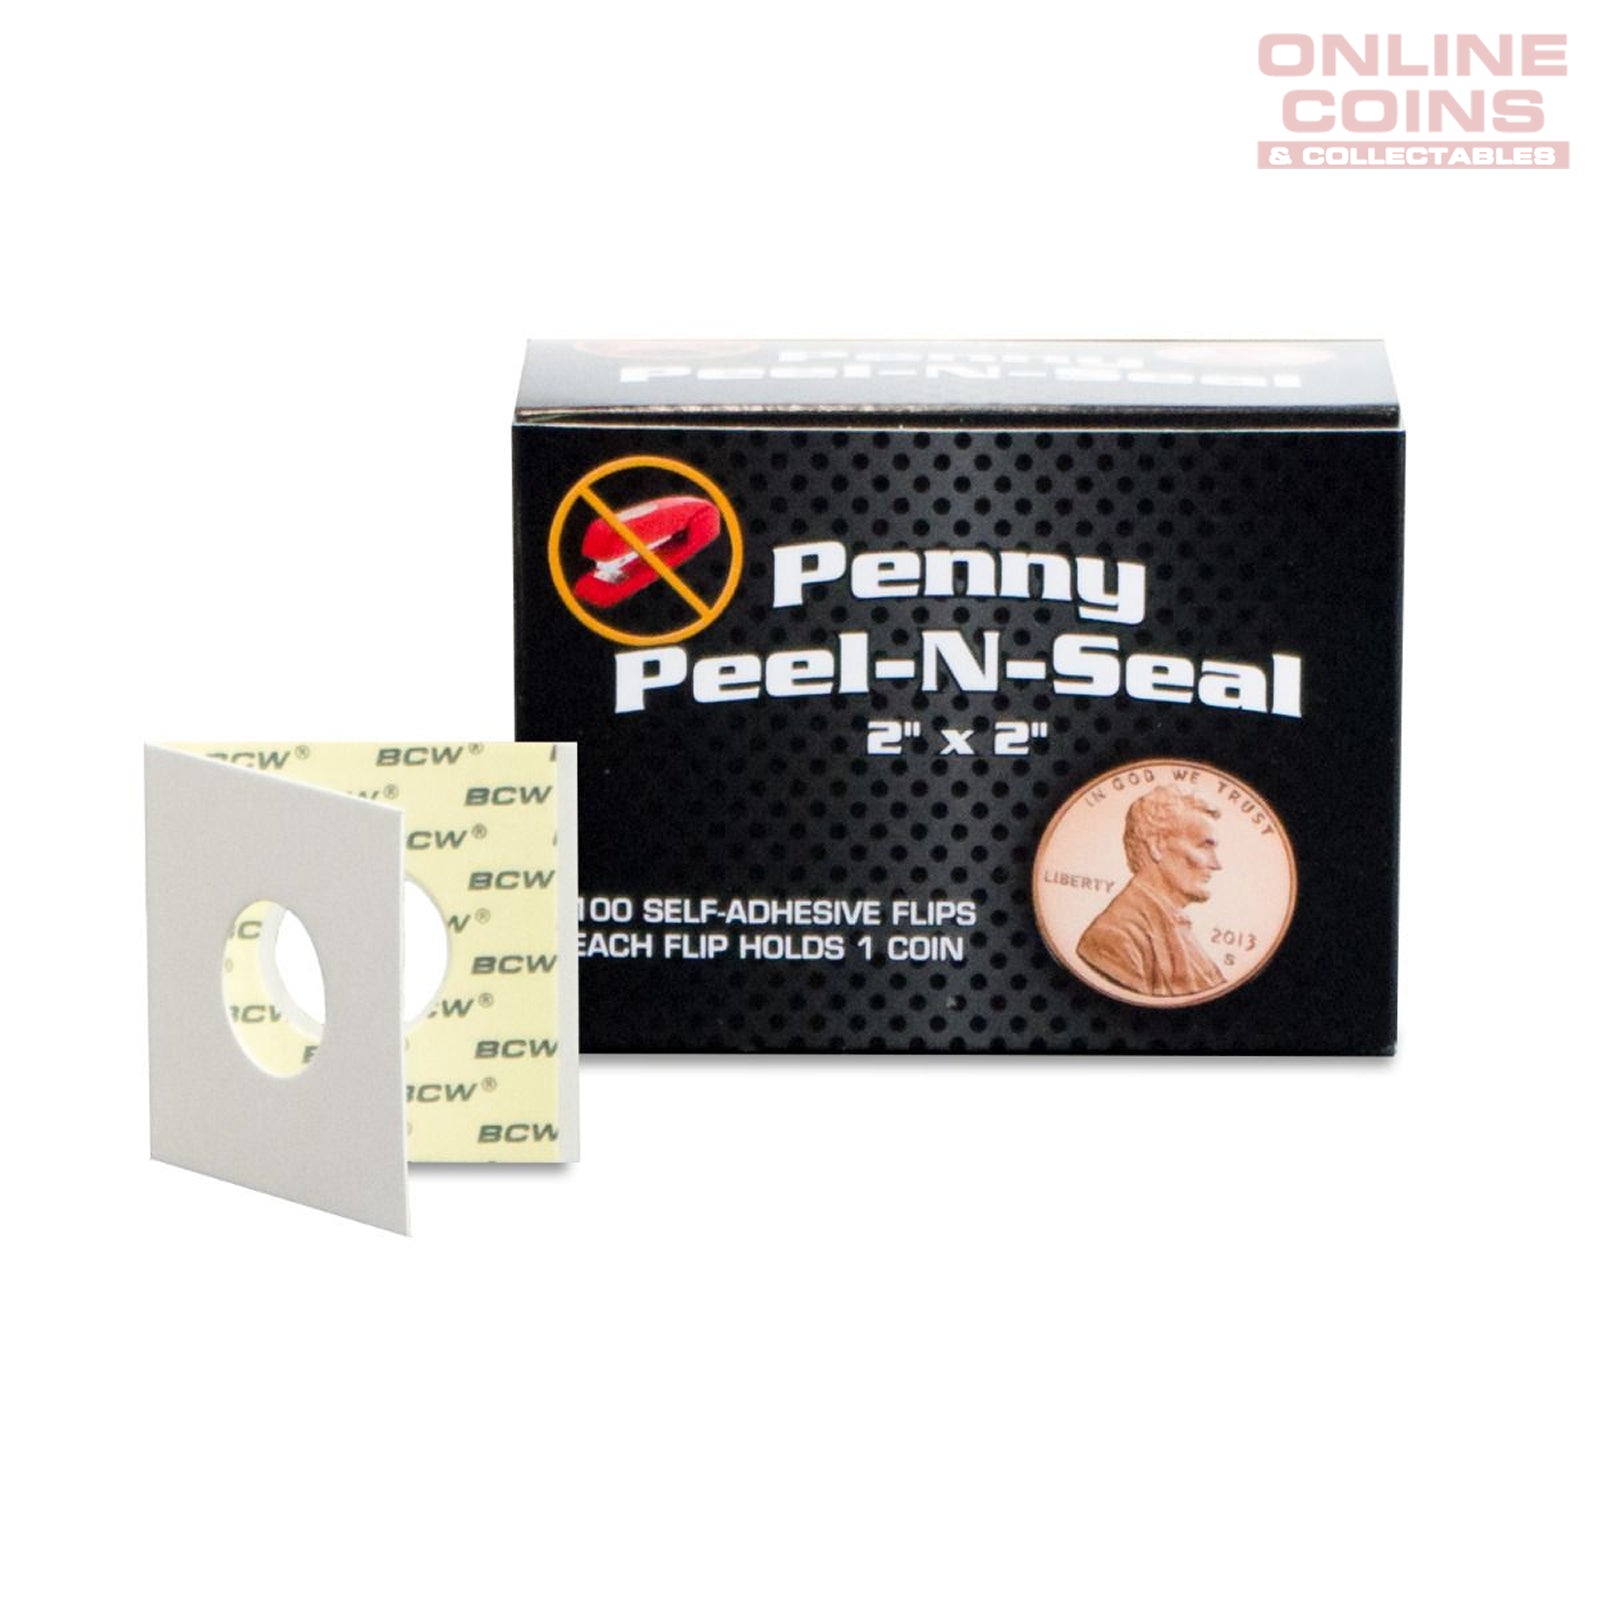 Peel-N-Seal Flips 2x2 - Adhesive - Penny - 100 pack (Suitable for Australian Sixpence, Half Sovereign, 1c and 2c Coins)